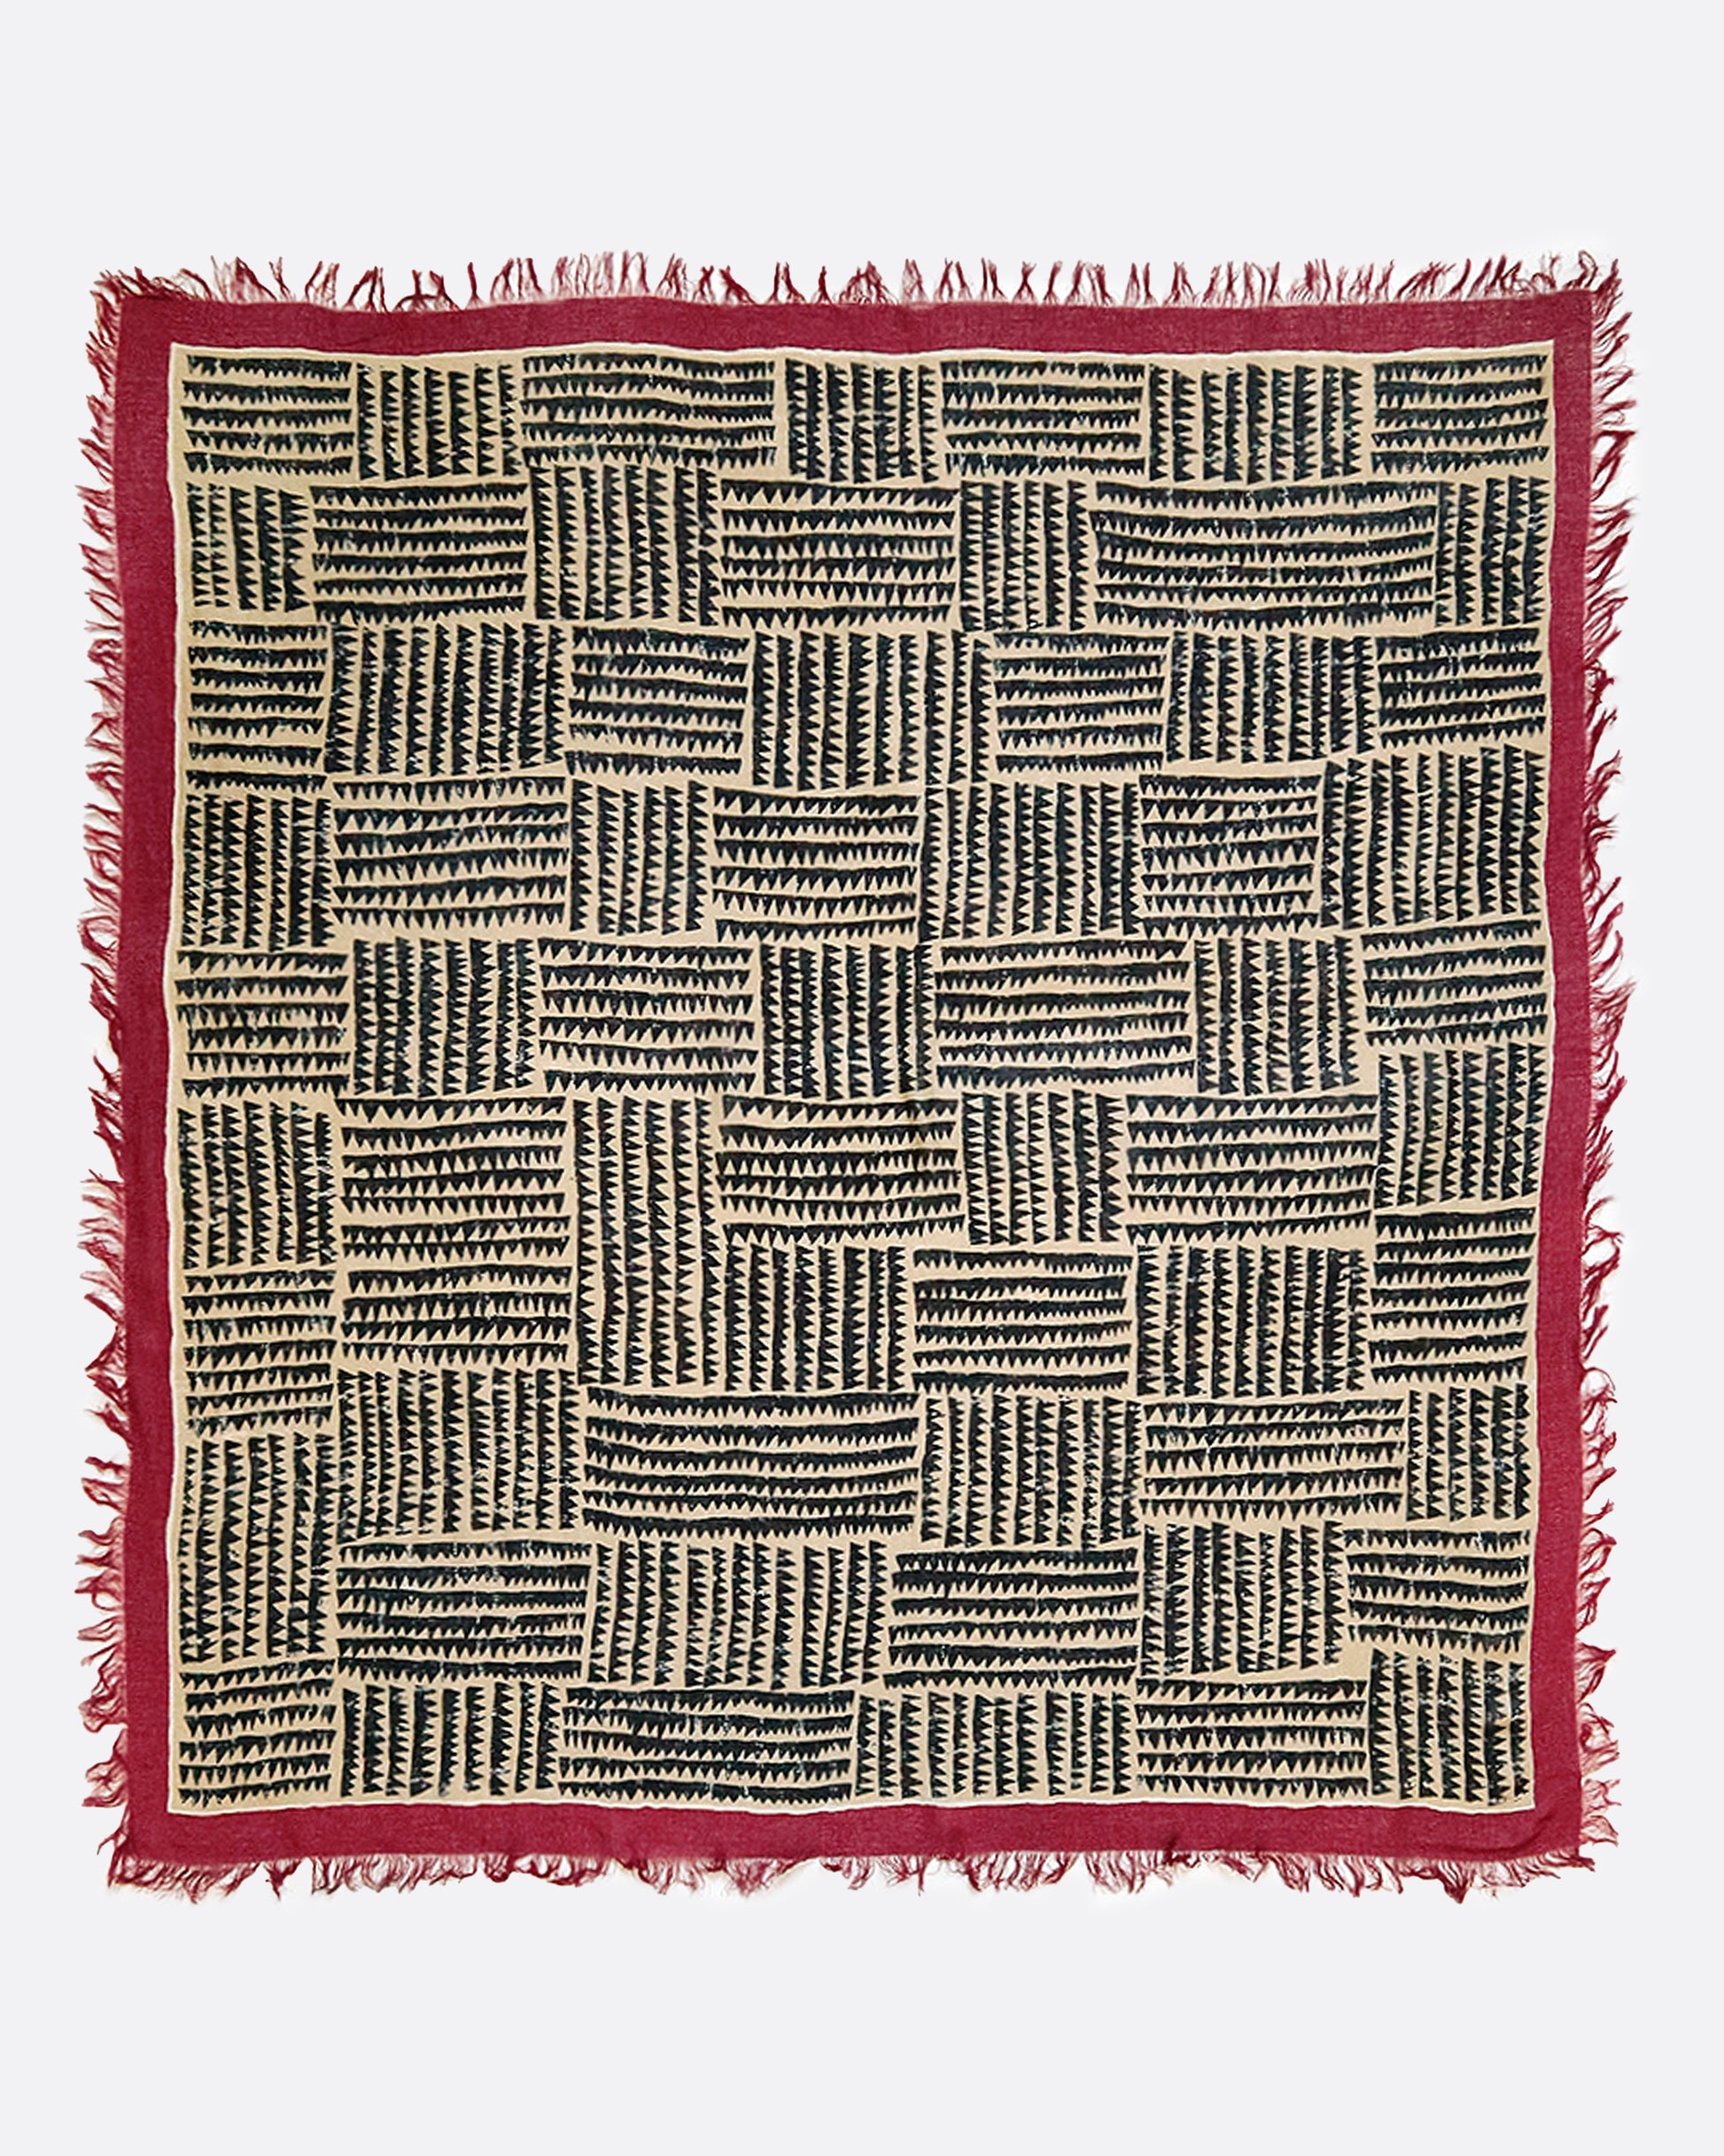 A large, fringy stole covered in a sawtooth block pattern with cranberry red edges.​